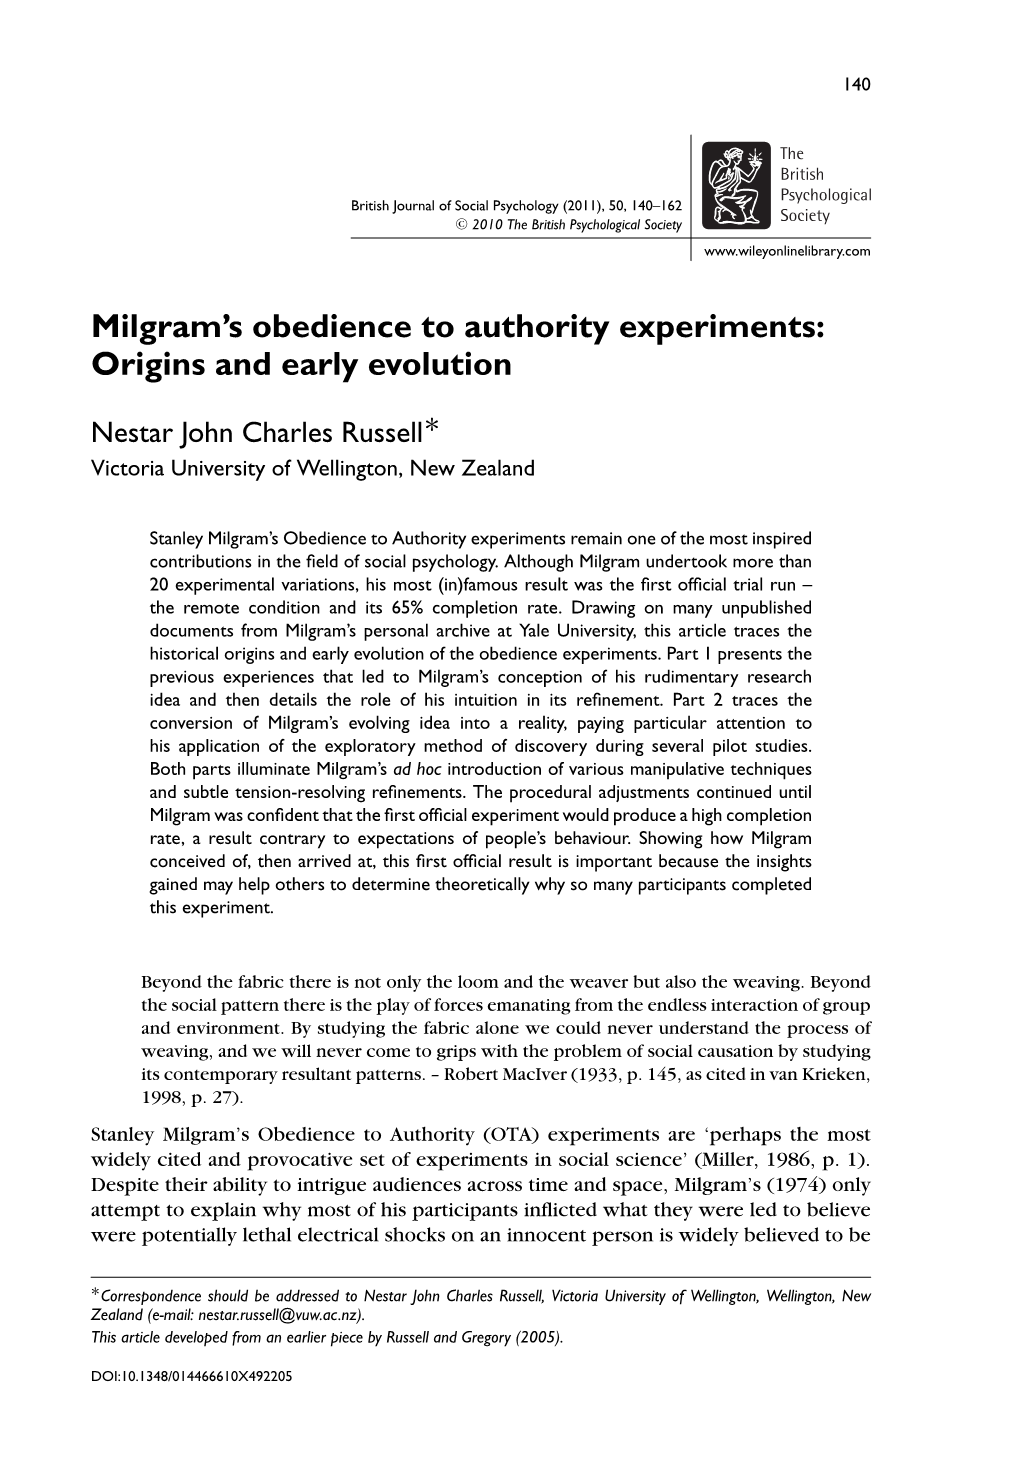 Milgram's Obedience to Authority Experiments: Origins and Early